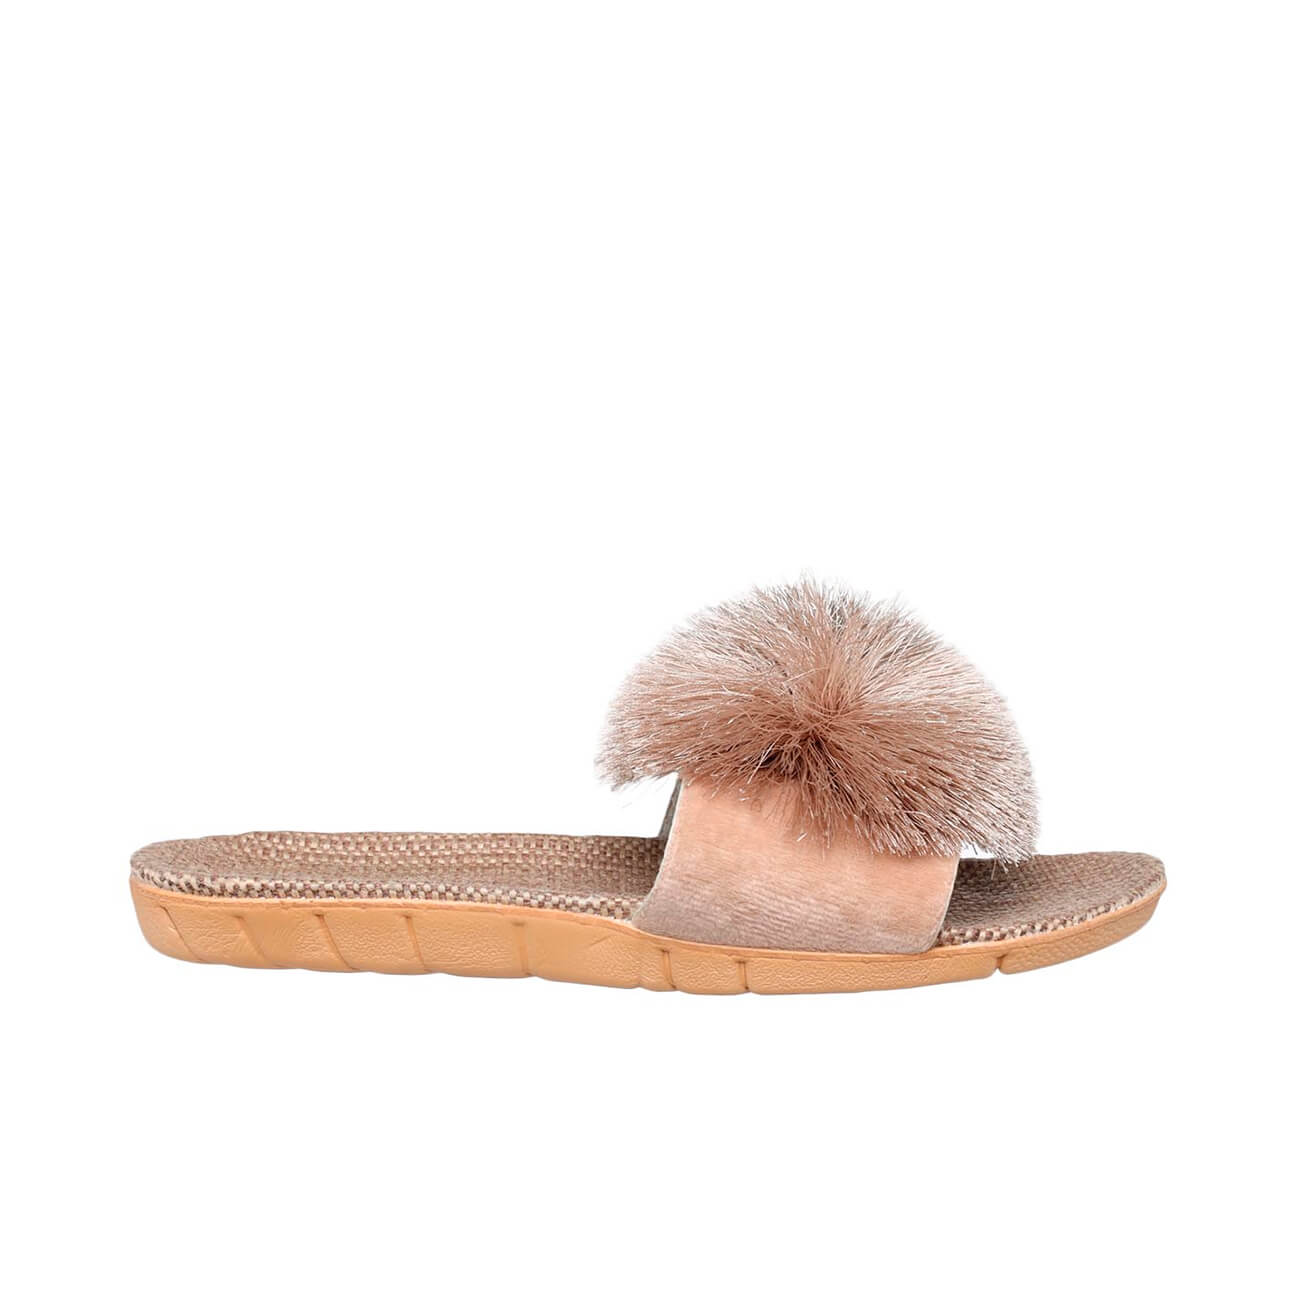 Women's slippers, home, p. 35-36, with pompom, polyester / linen, gray-brown, Pompon изображение № 1